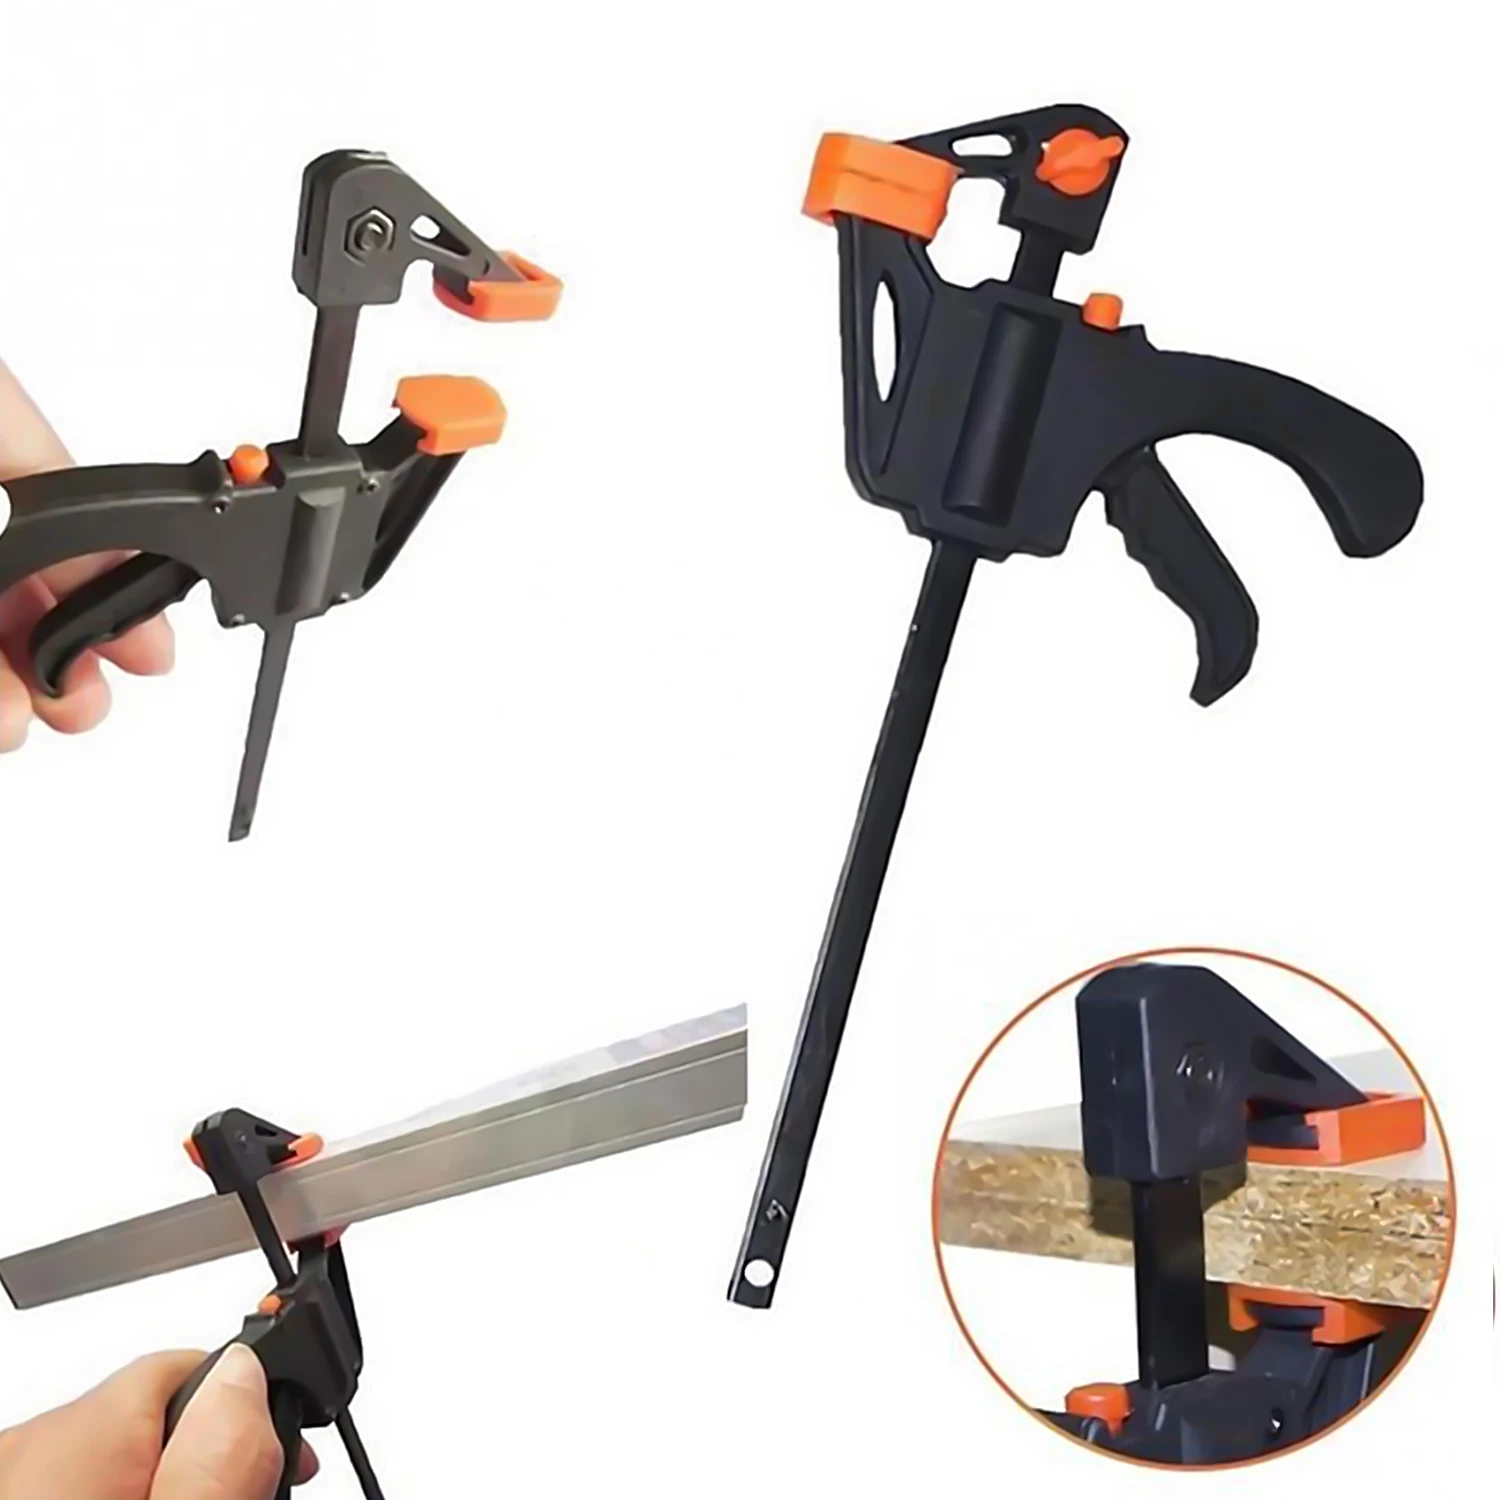 

5pcs 4 Inch F-Clamps Bar Quick Clip Grip Ratchet Release Squeeze Woodworking DIY Carpenter Hand Tool Kit